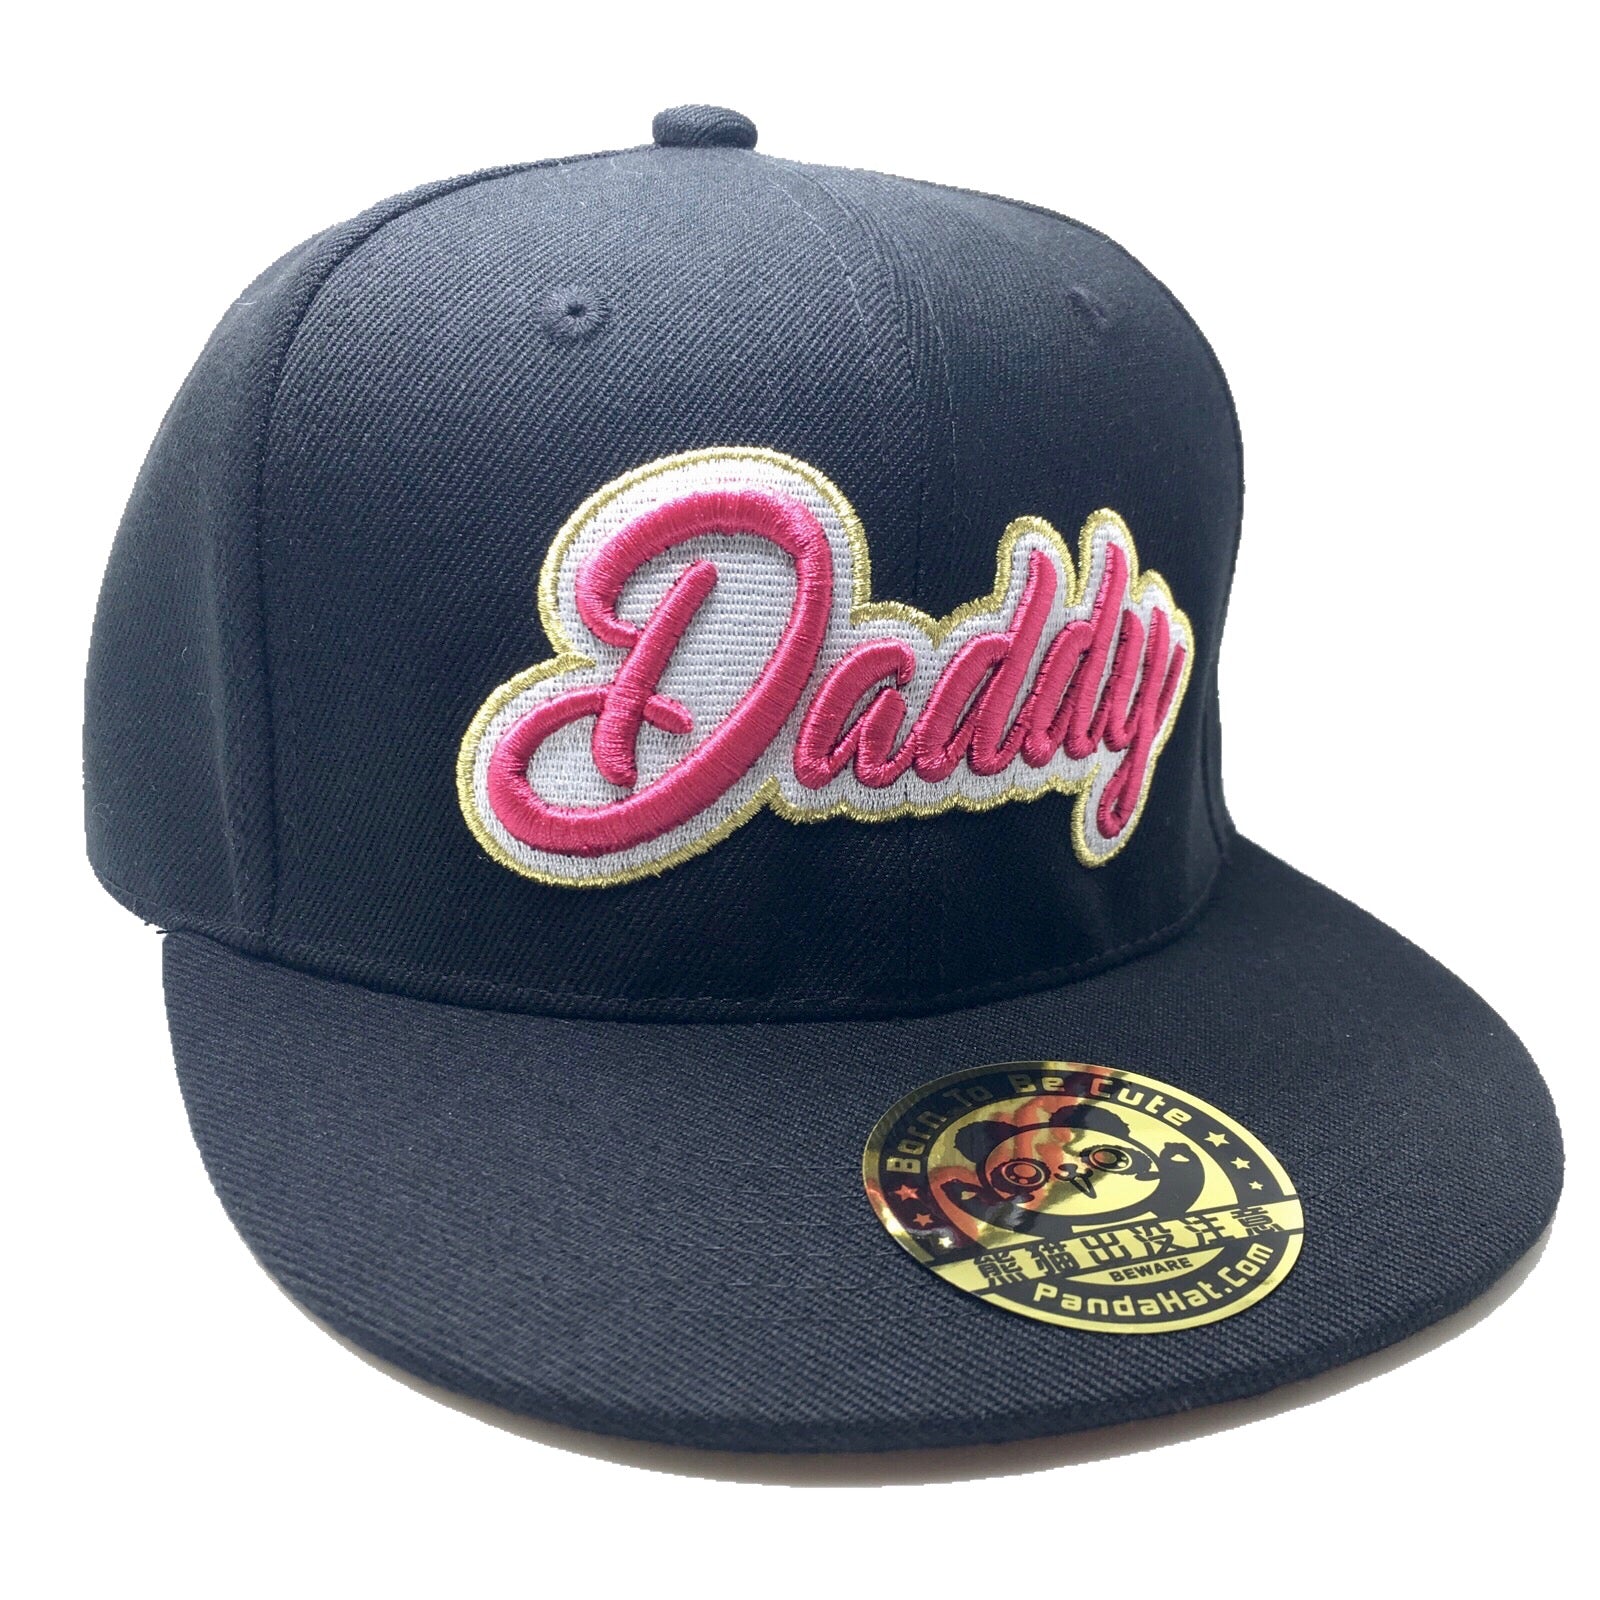 DADDY CURSIVE 3D PUFF EMBROIDERY HAT - Pandahat